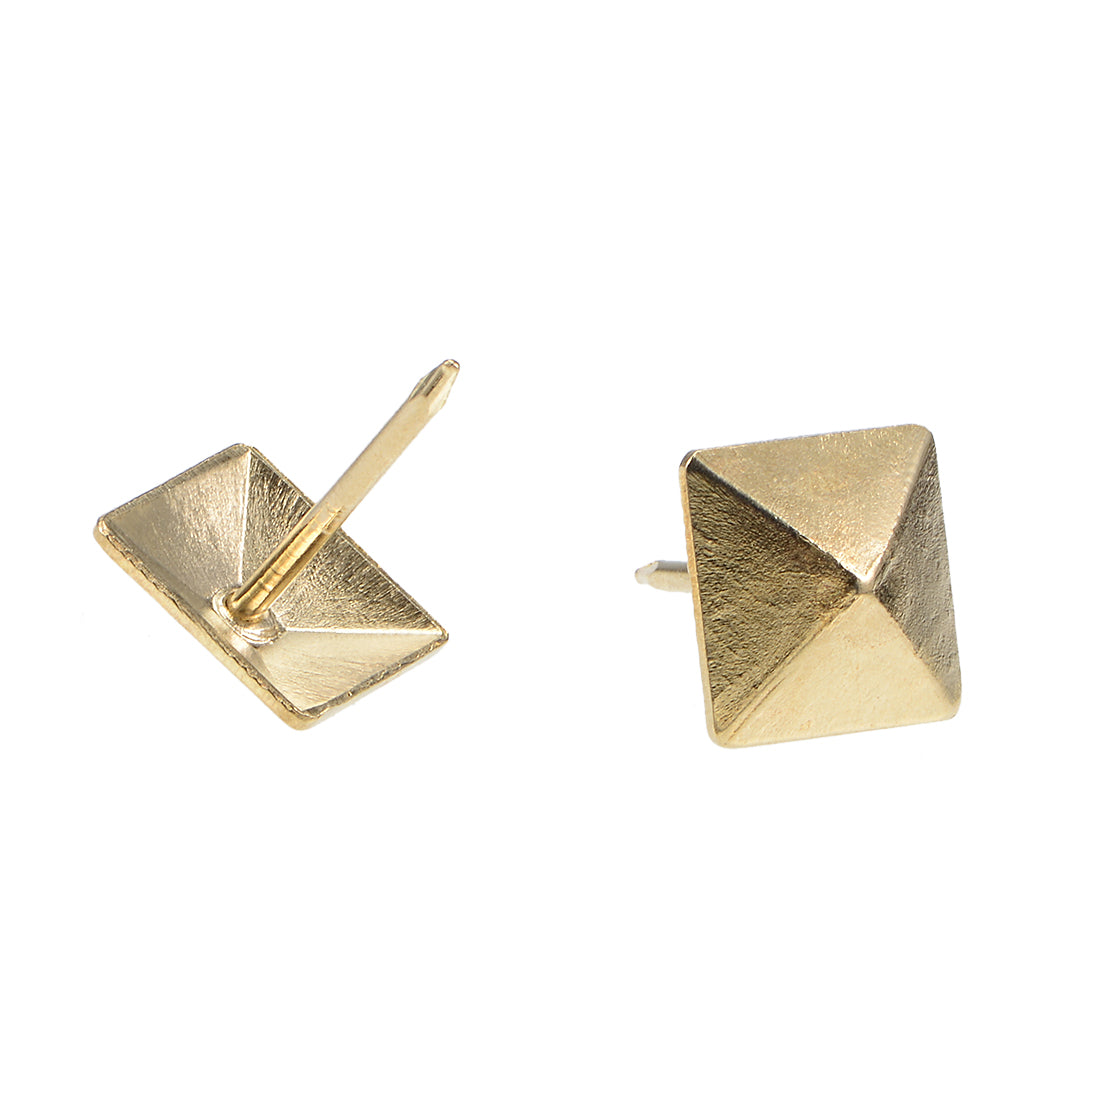 uxcell Uxcell Upholstery Nails Tacks 12mm Square Head Antique Furniture Nails Pins Gold Tone 100 Pcs